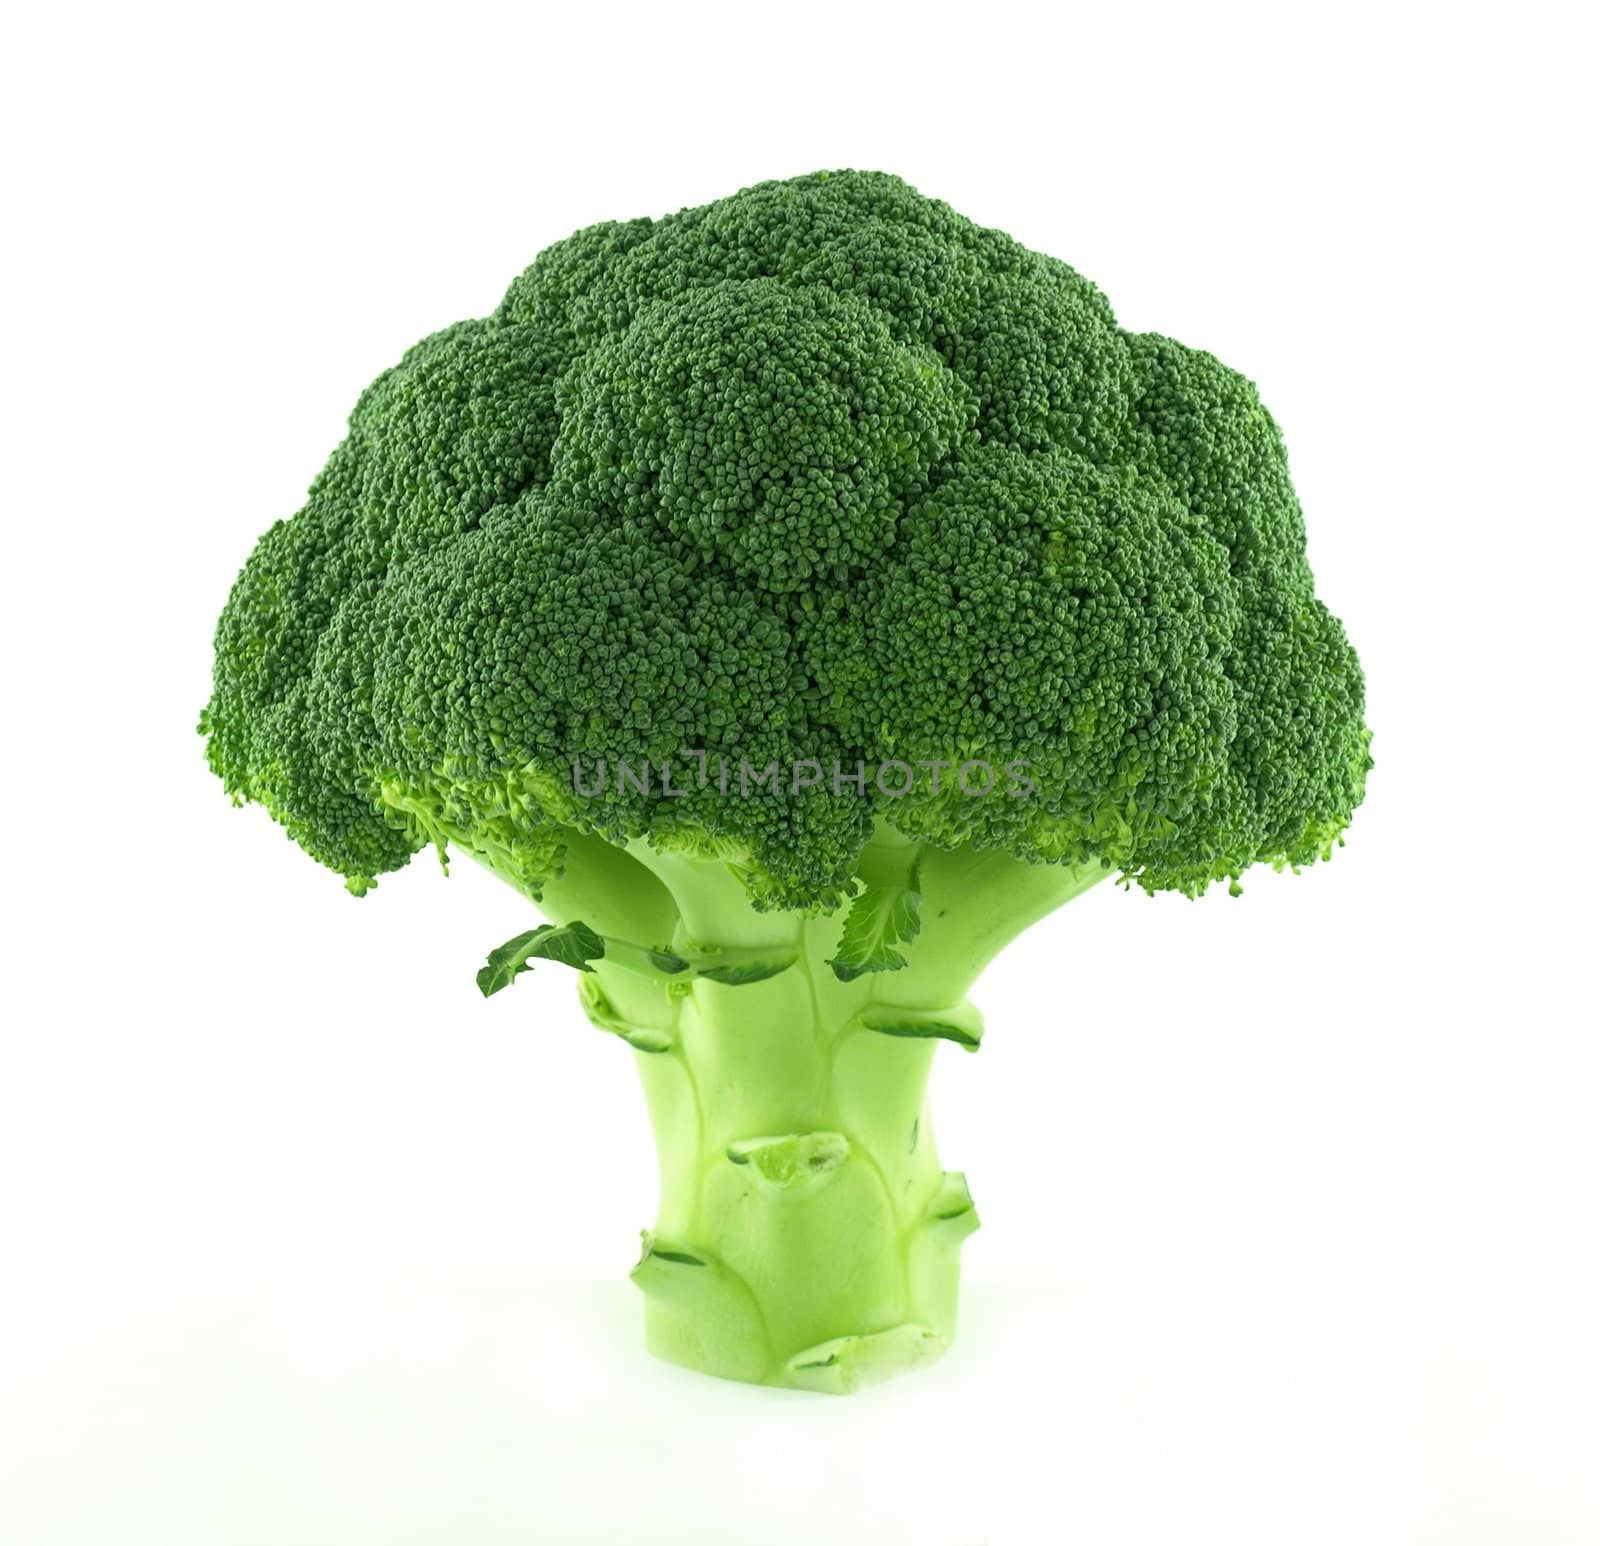 A fresh and green image of a standing broccoli